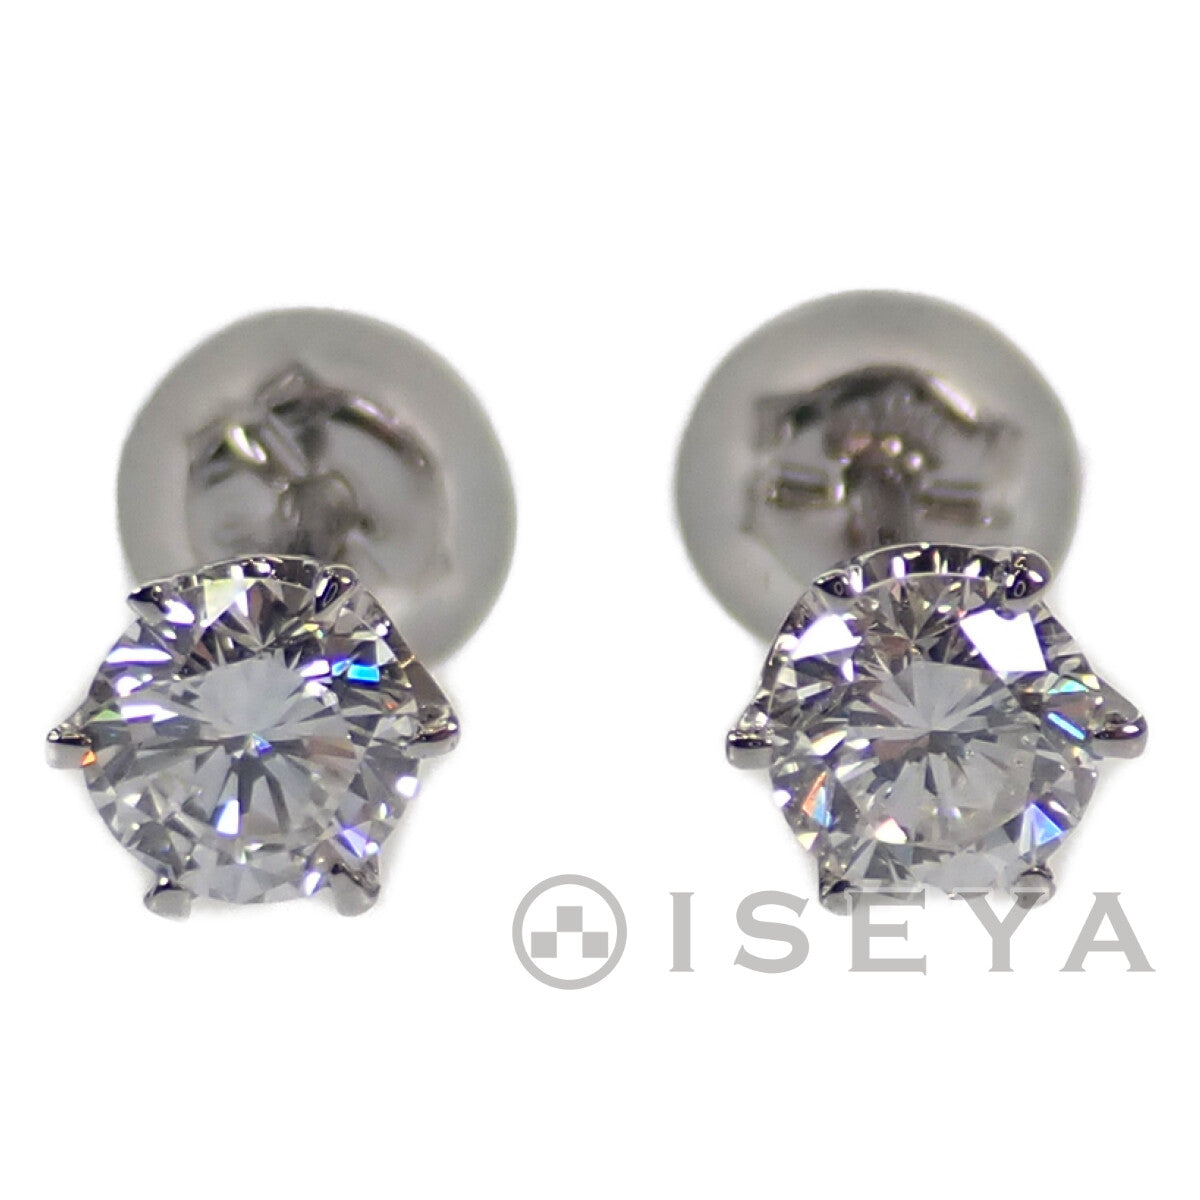 LuxUness  Stylish Pt900 Diamond Stud Earrings 0.351 0.322ct, Ladies Silver - 434872 in Excellent condition